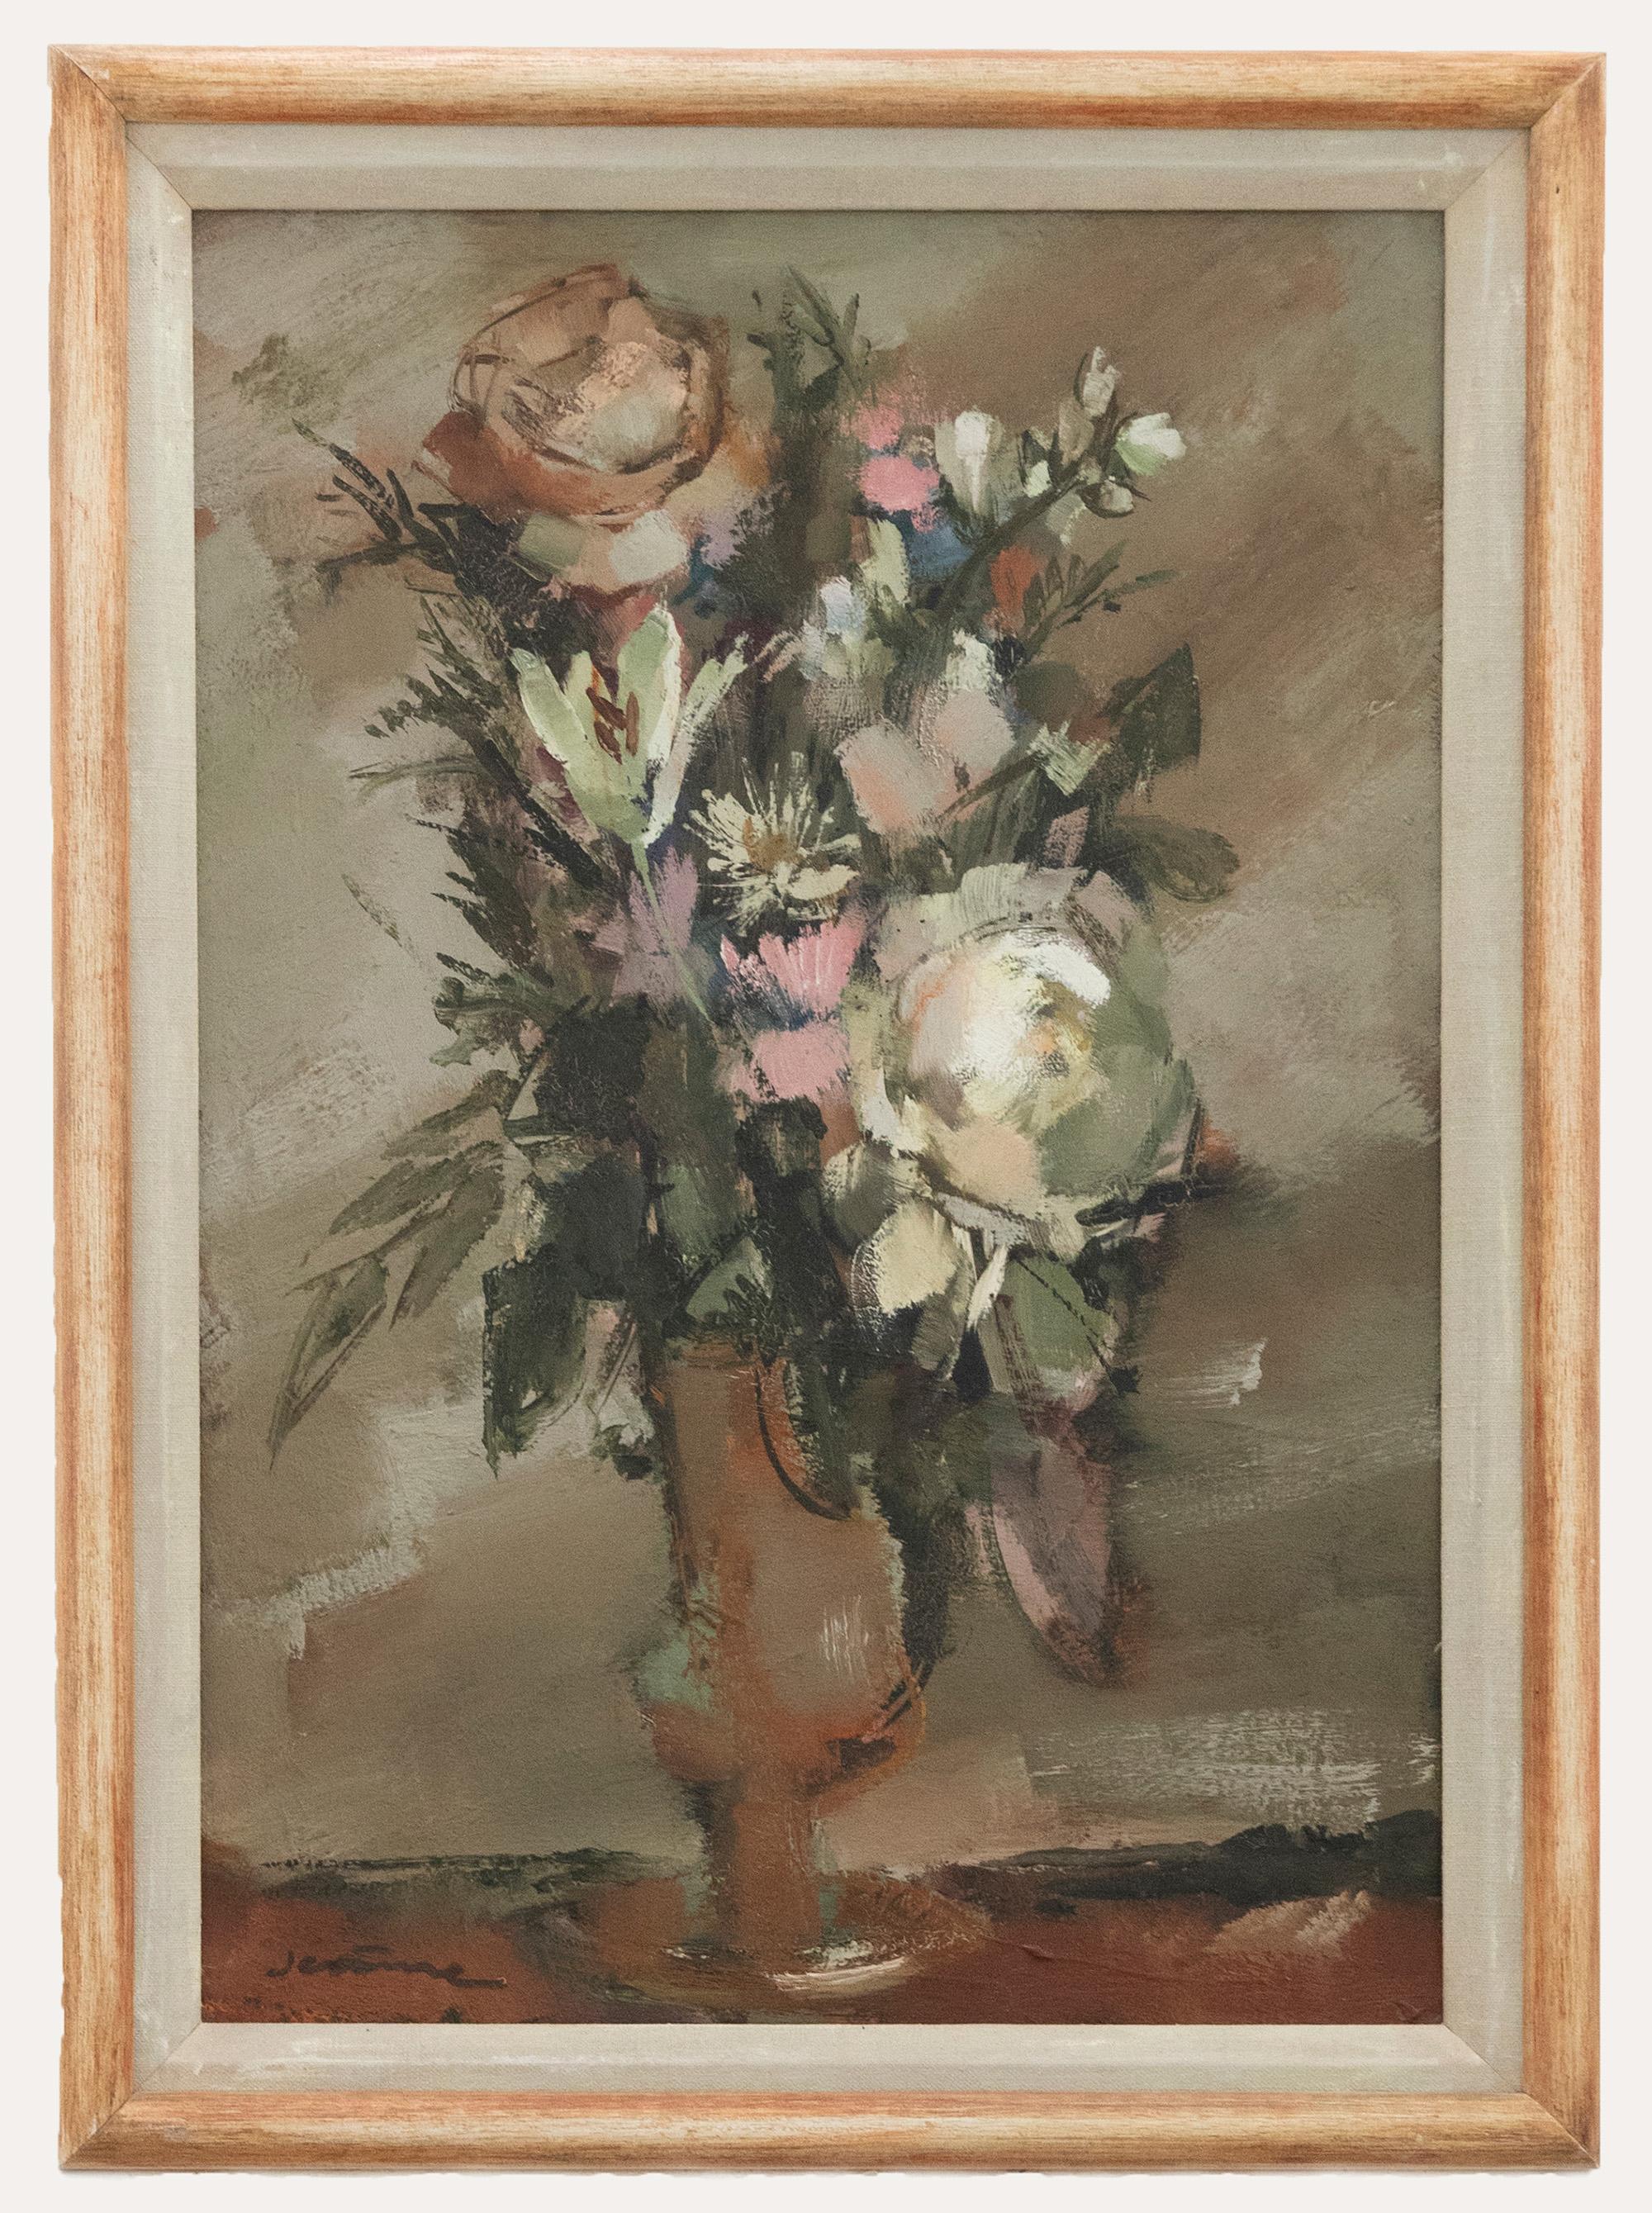 A charming still life study by French artist Pierre Jerome. The artist captures the scene in an expressive manner depicting roses and peonies in a tall vase. Signed to the lower right. Presented in a wooden frame with a cotton slip. On canvas.
